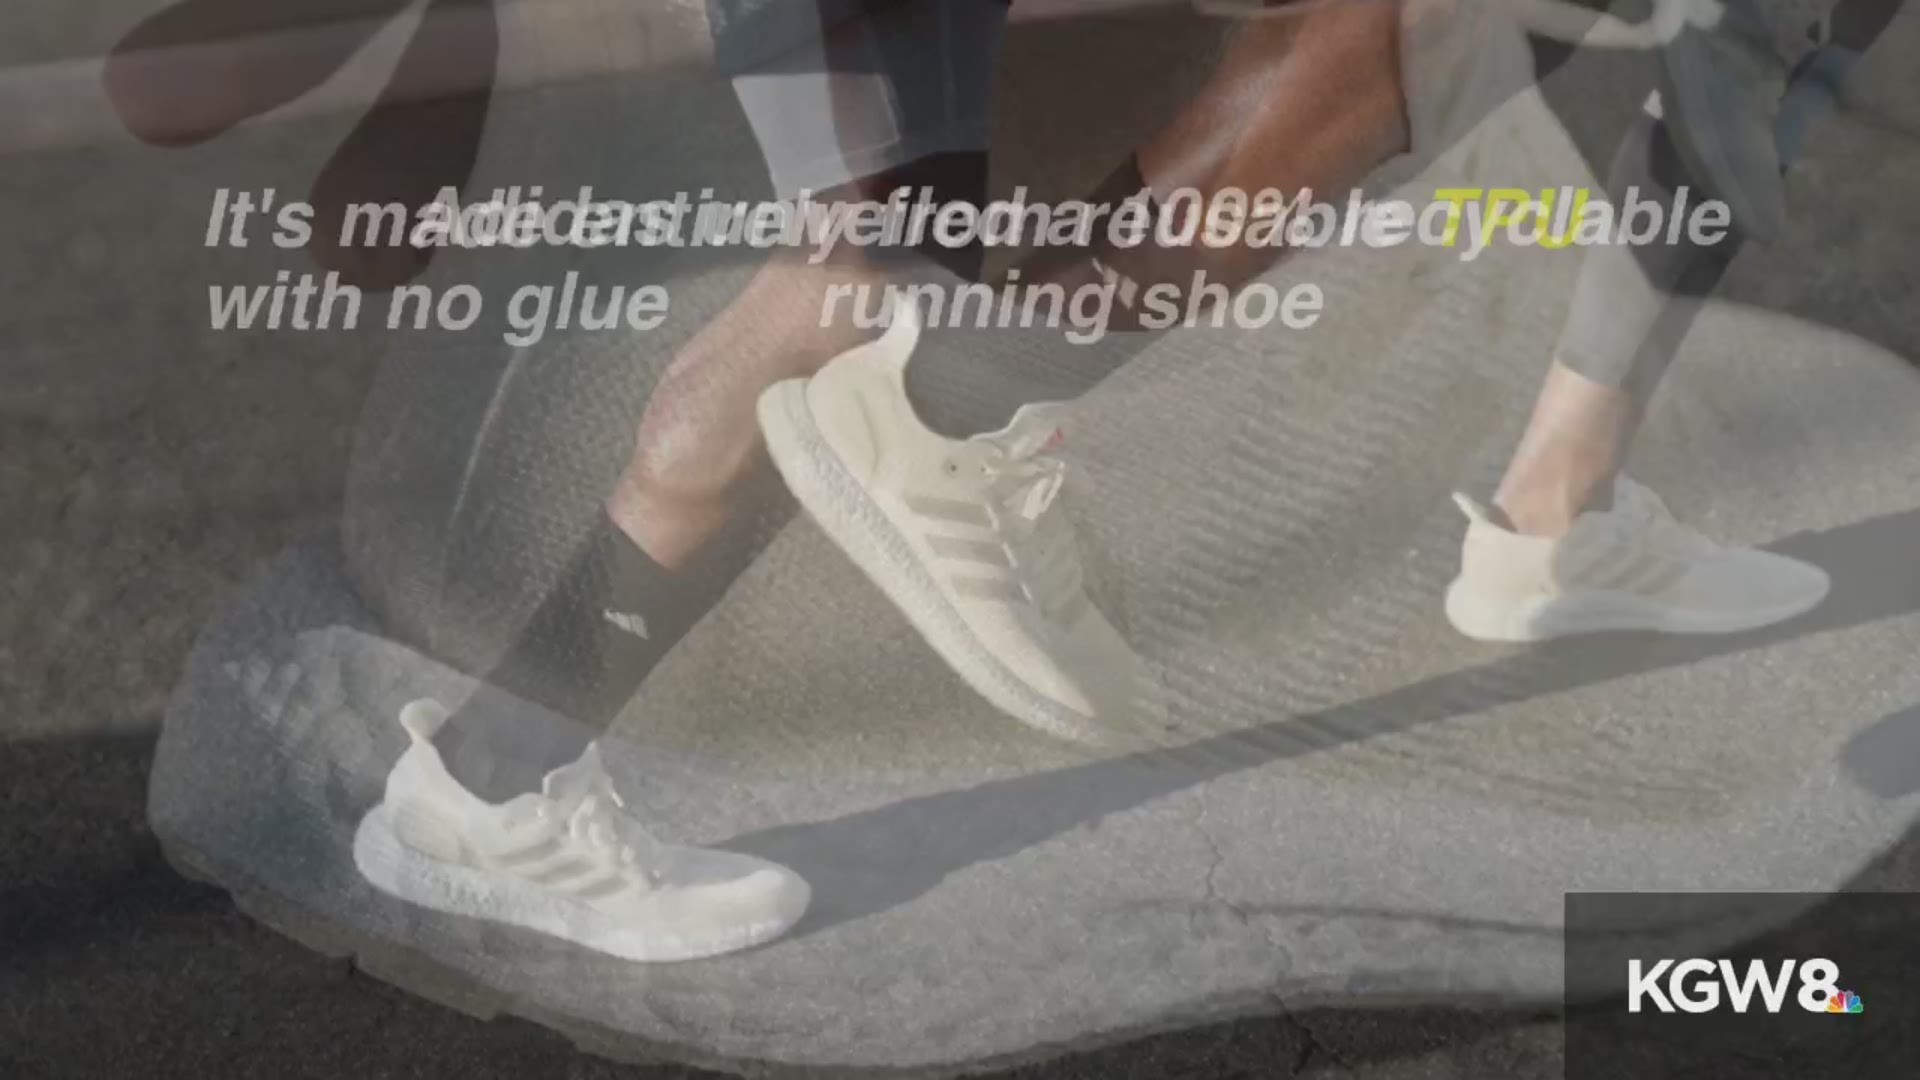 Once they are worn out, the shoes can be returned to Adidas, where they will be ground to pellets and melted into material for components for a new pair of shoes.